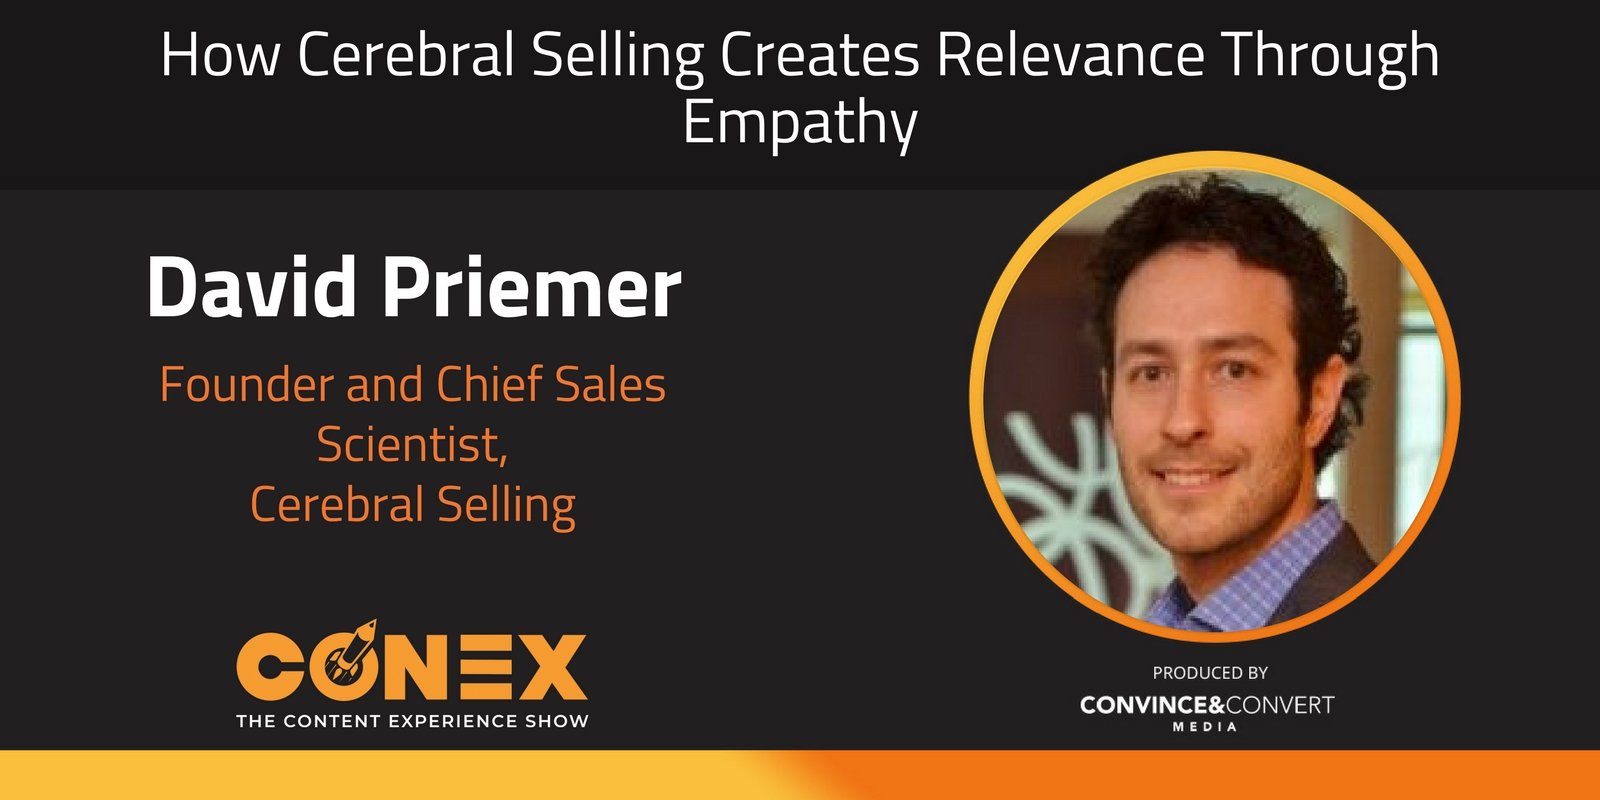 How Cerebral Selling Creates Relevance Through Empathy